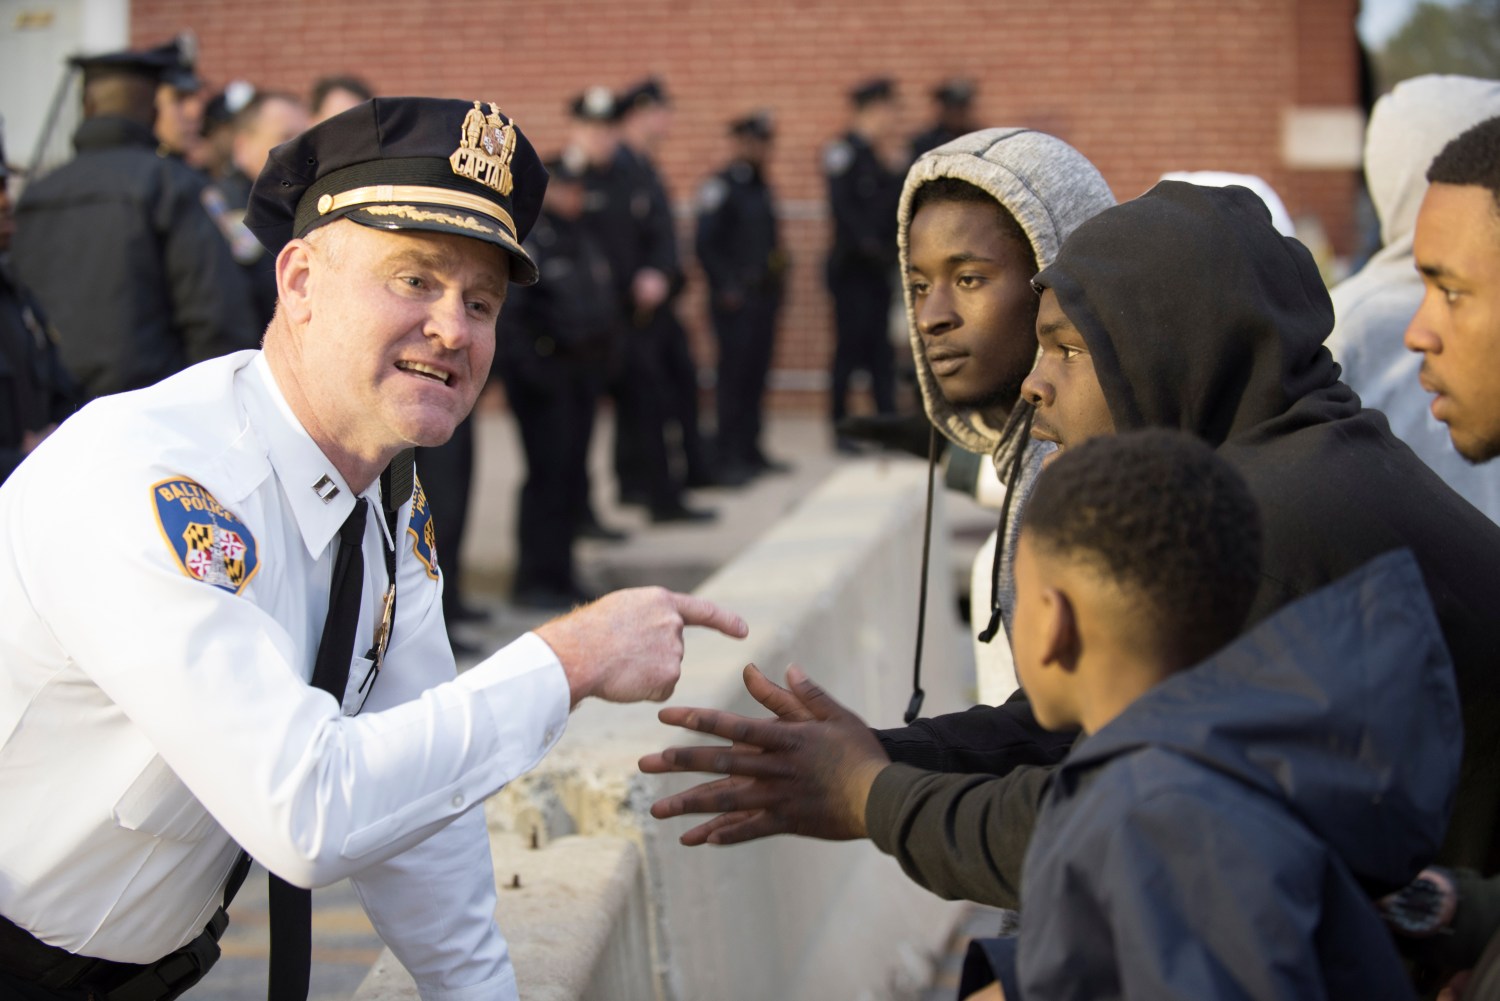 Captain Erik Pecha of the Baltimore Police Department chats with young demonstrators in front of the Baltimore Police Department Western District station.